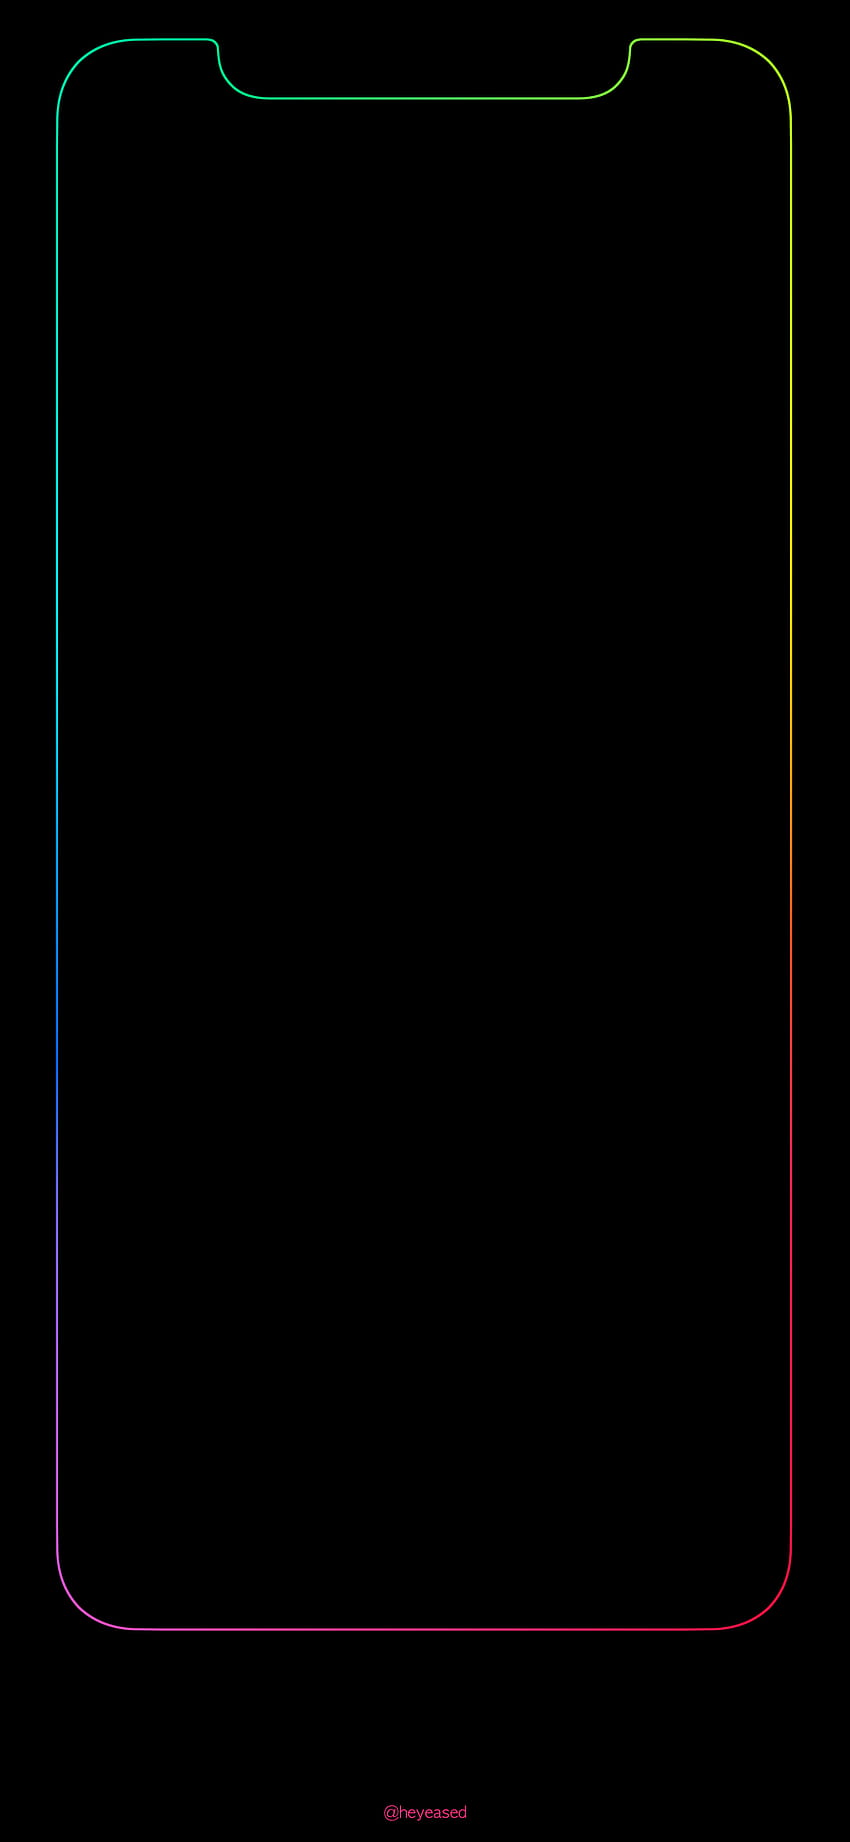 Please can someone make this fit the Mi 8 notch? : Xiaomi HD phone wallpaper